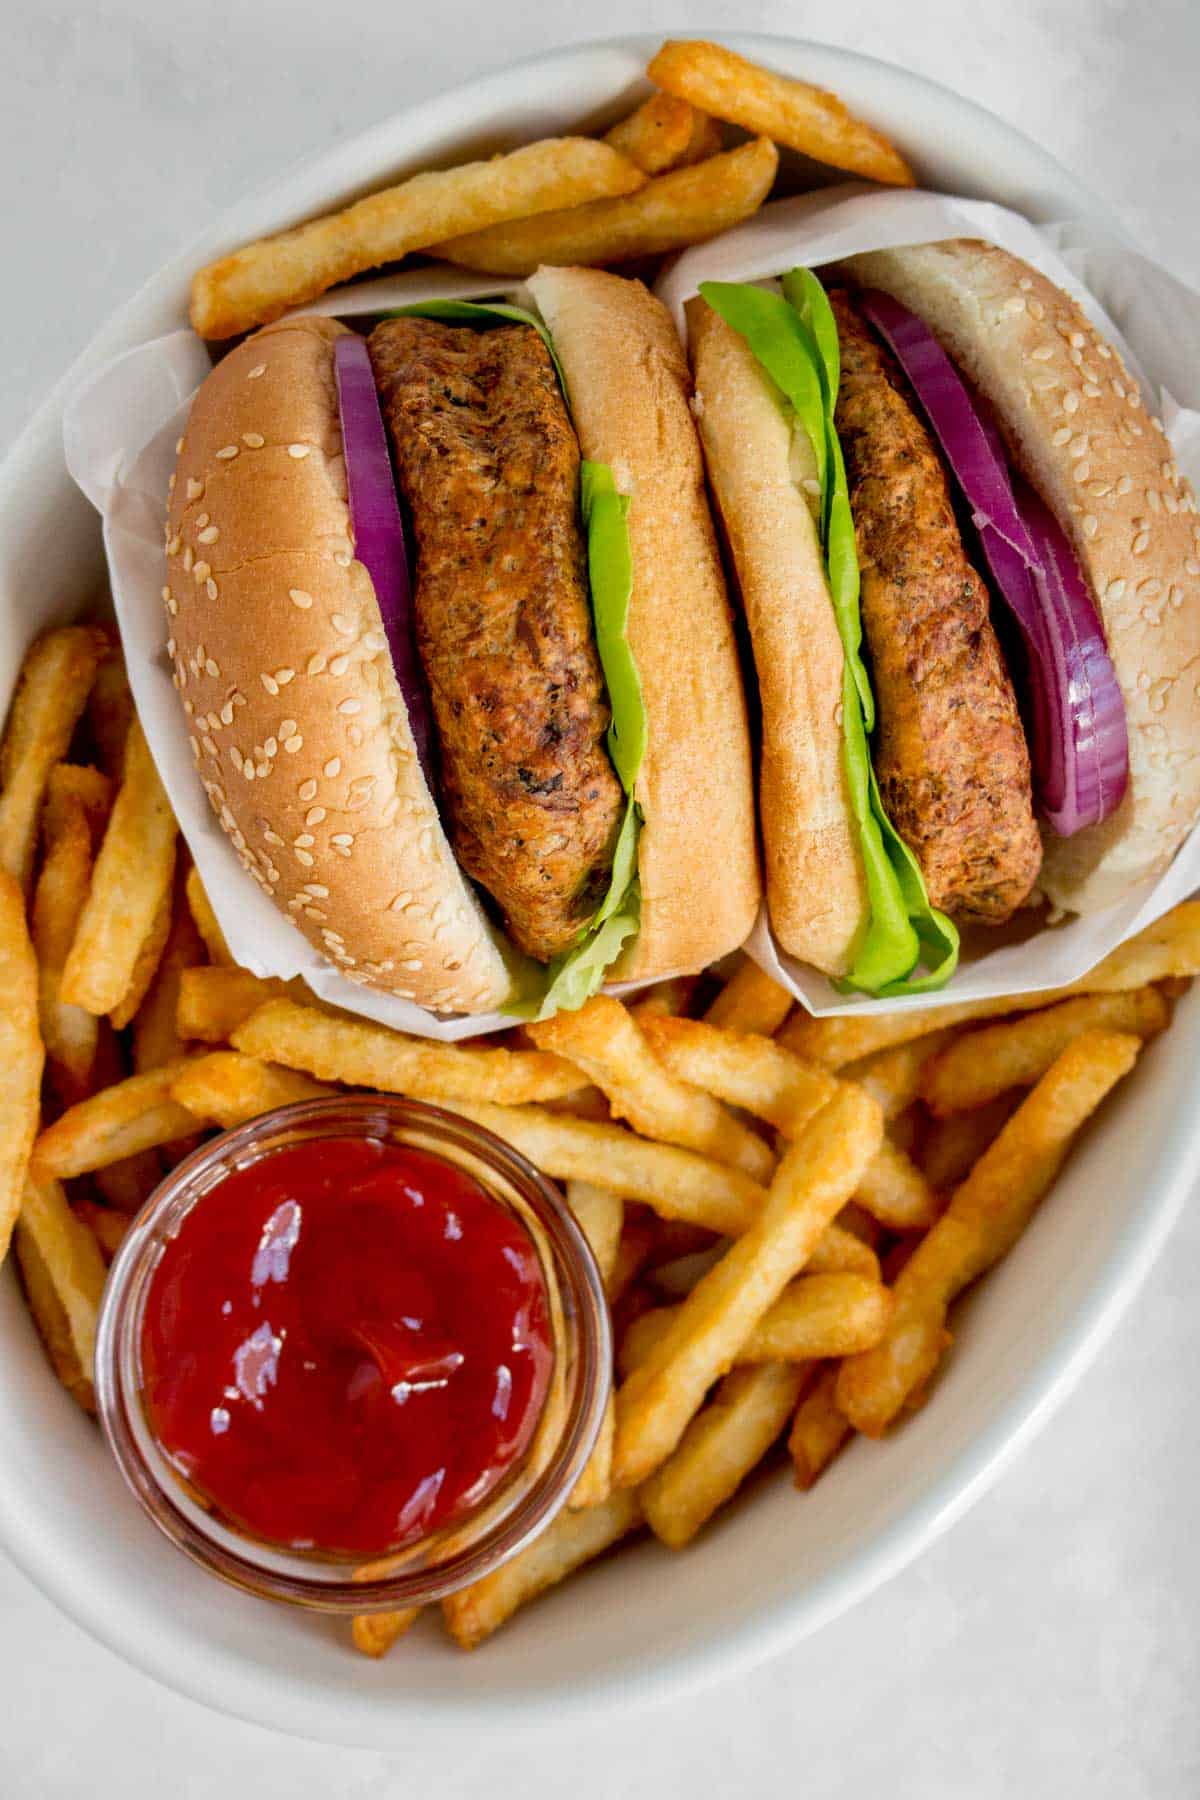 Close up of two turkey burgers with fries and ketchup.